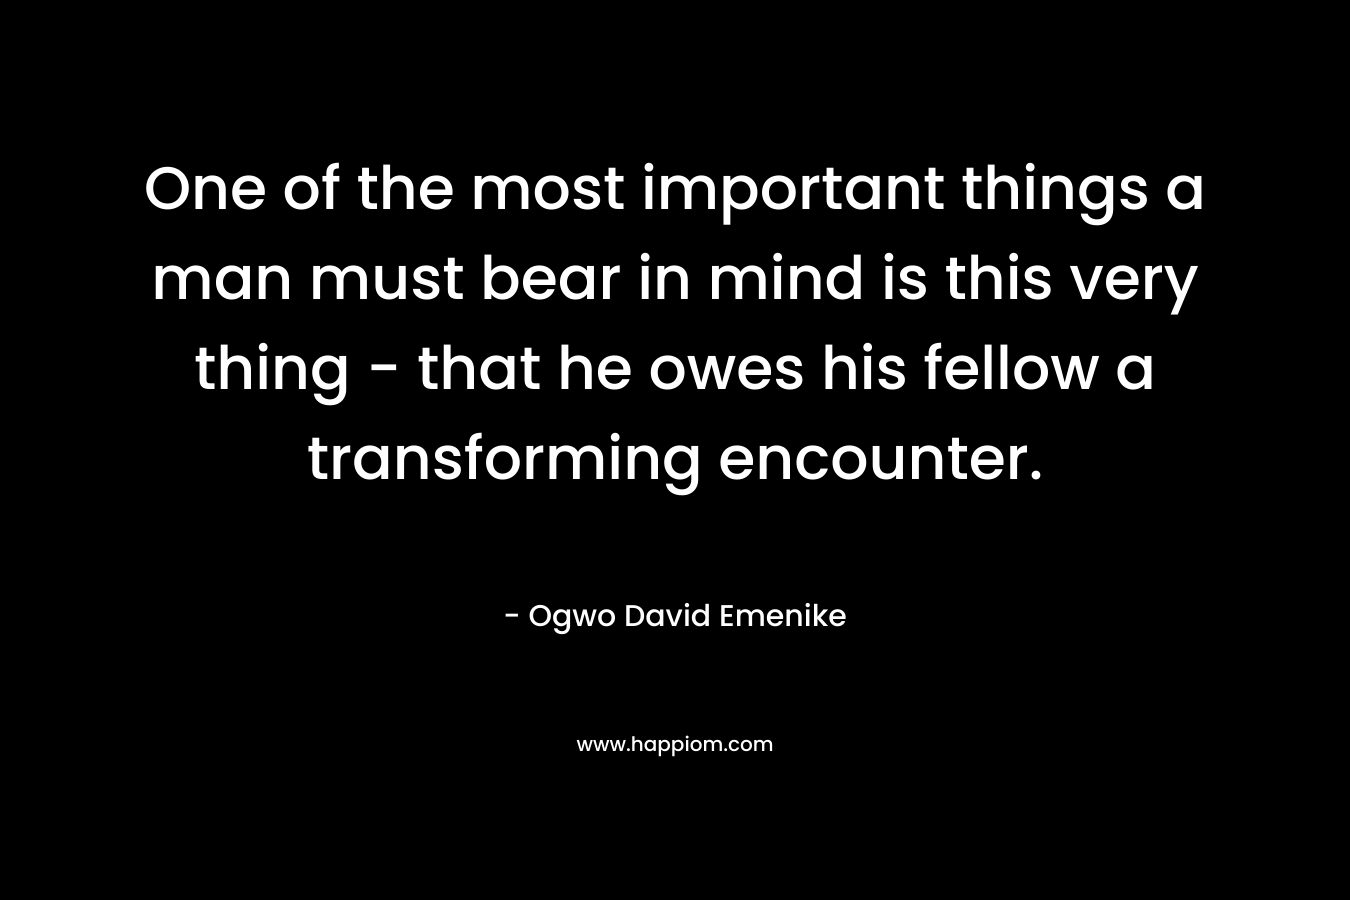 One of the most important things a man must bear in mind is this very thing - that he owes his fellow a transforming encounter.